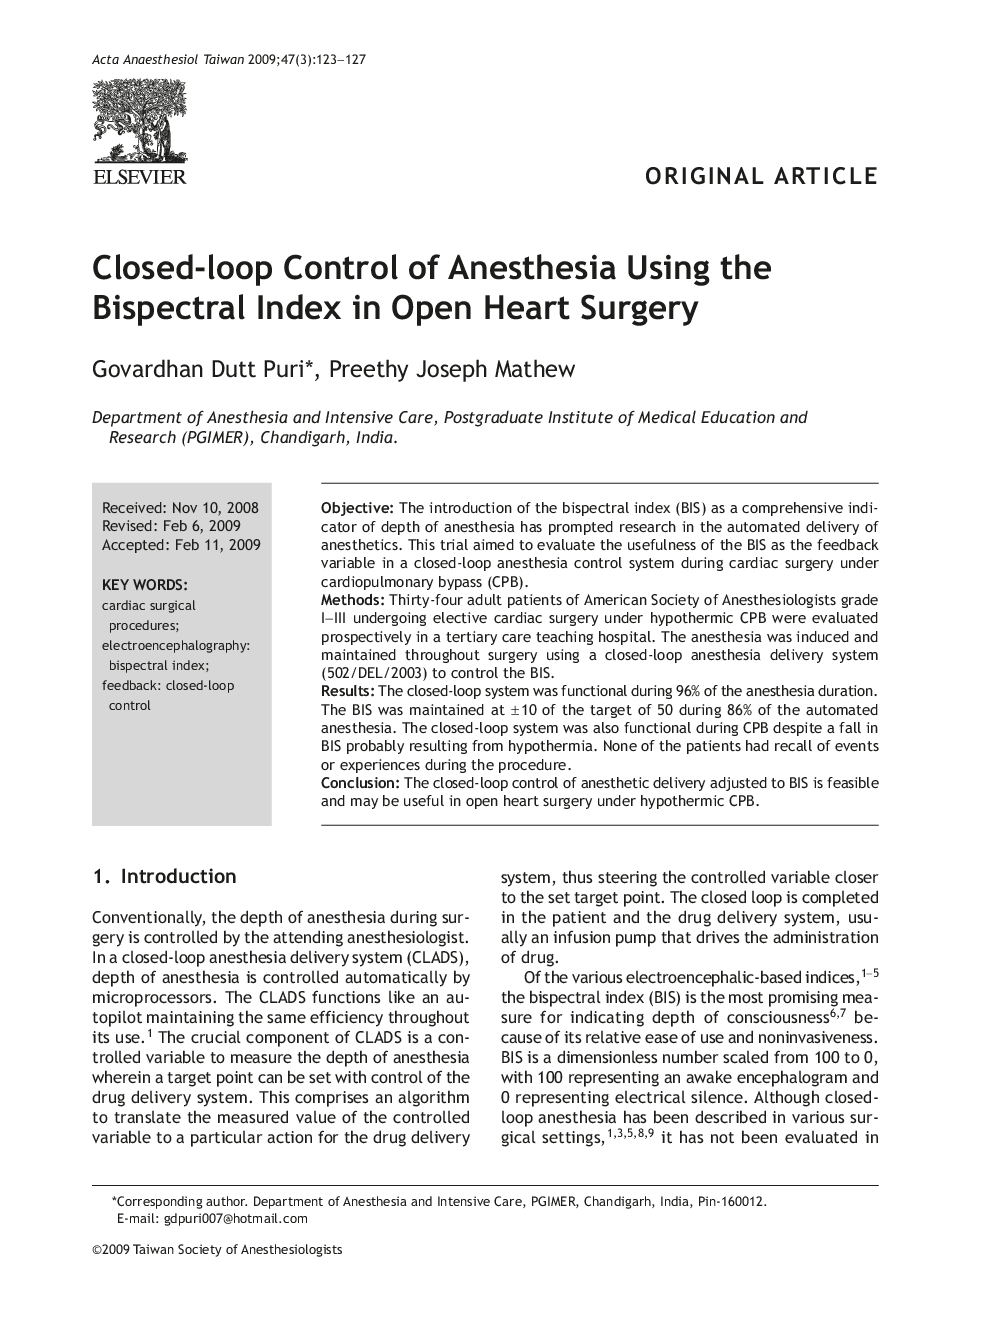 Closed-loop Control of Anesthesia Using the Bispectral Index in Open Heart Surgery